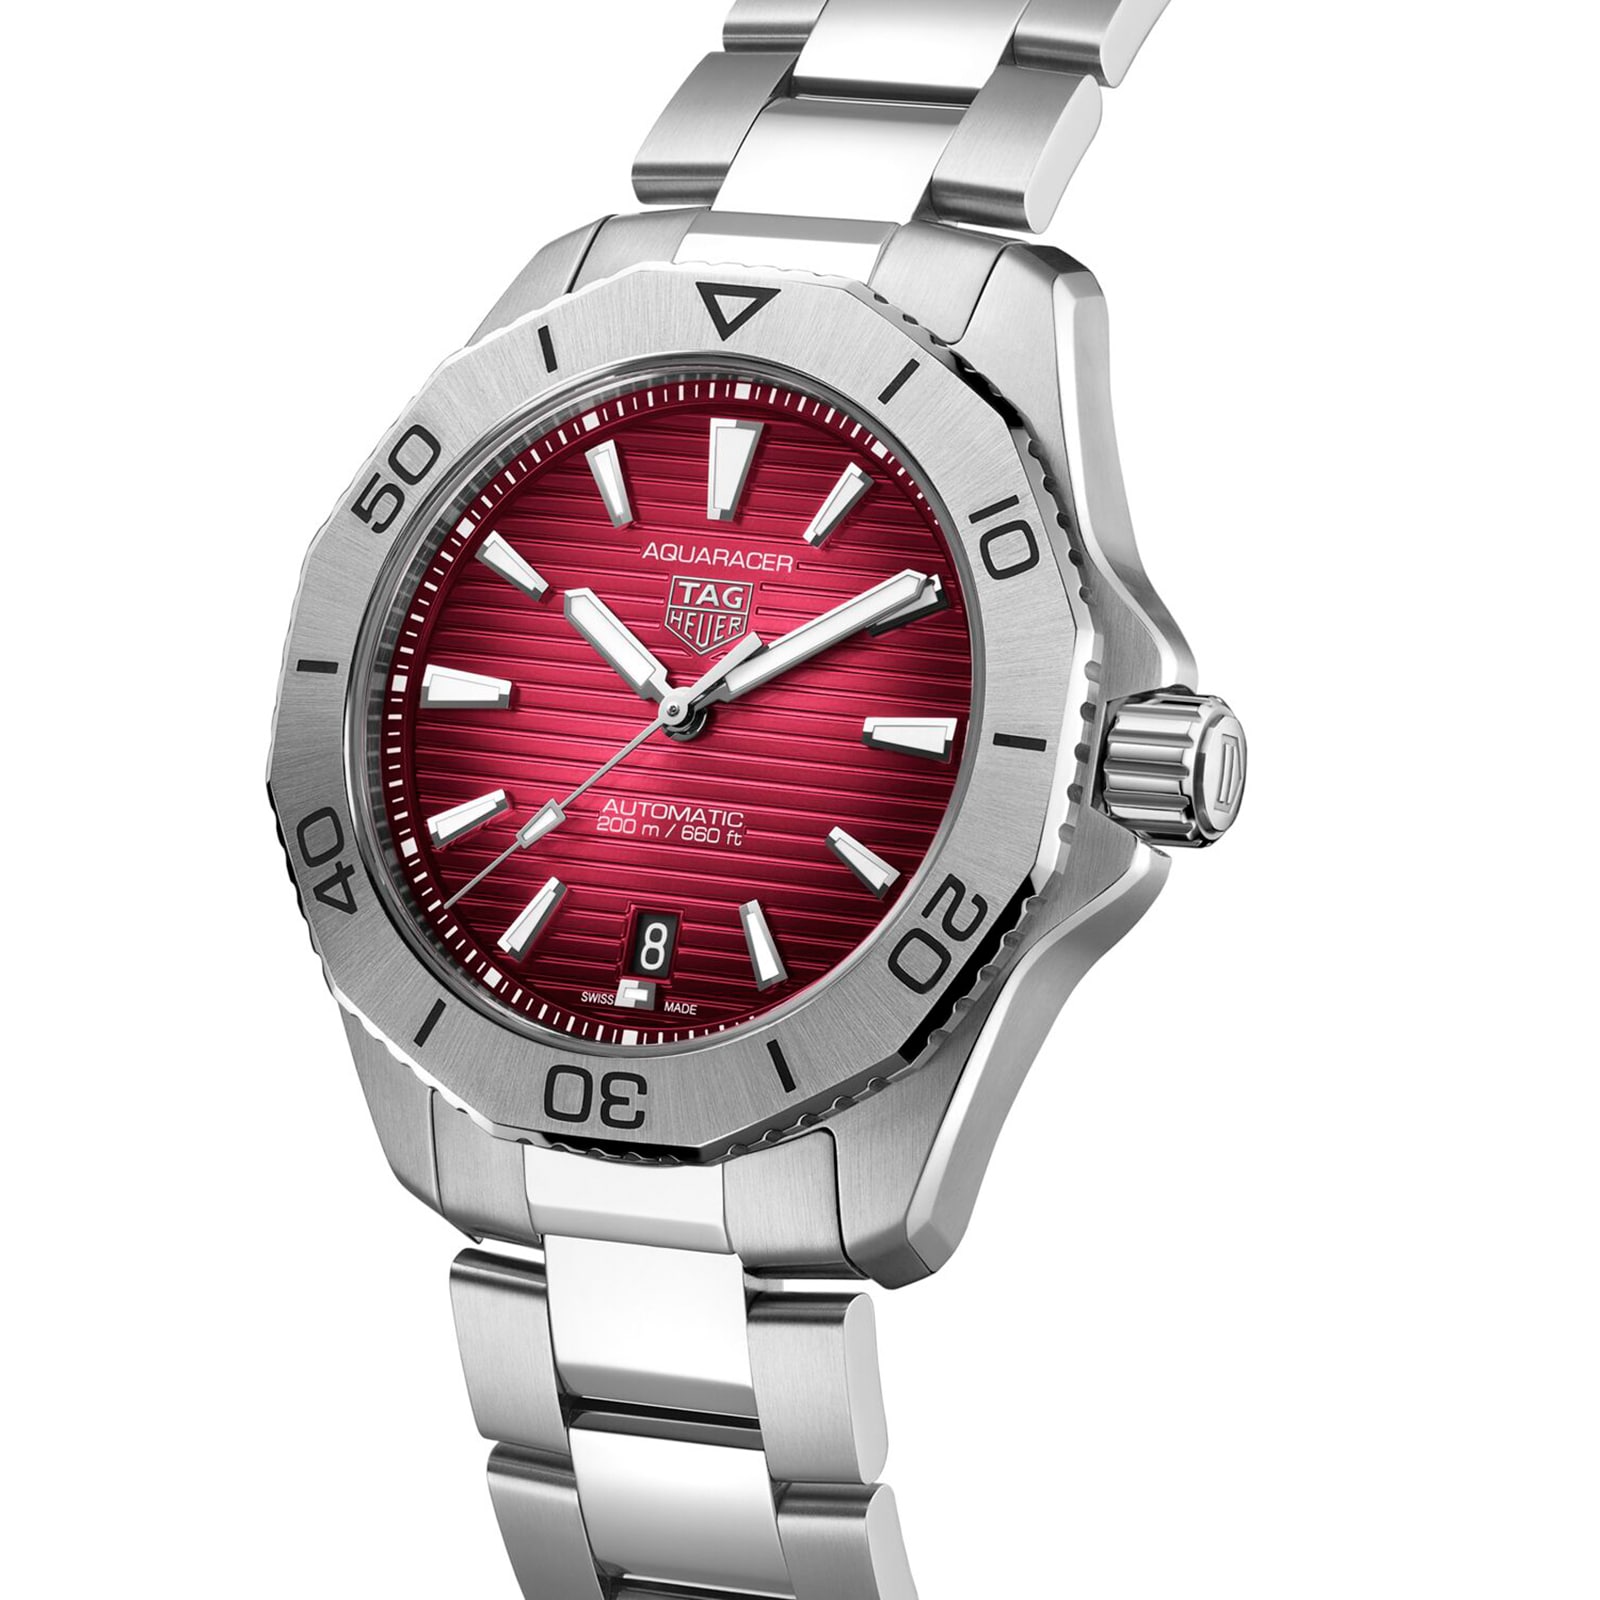 Raymond Weil Men's Tango watch with Black Dial and Red Aluminum Bezel |  Metals in Time